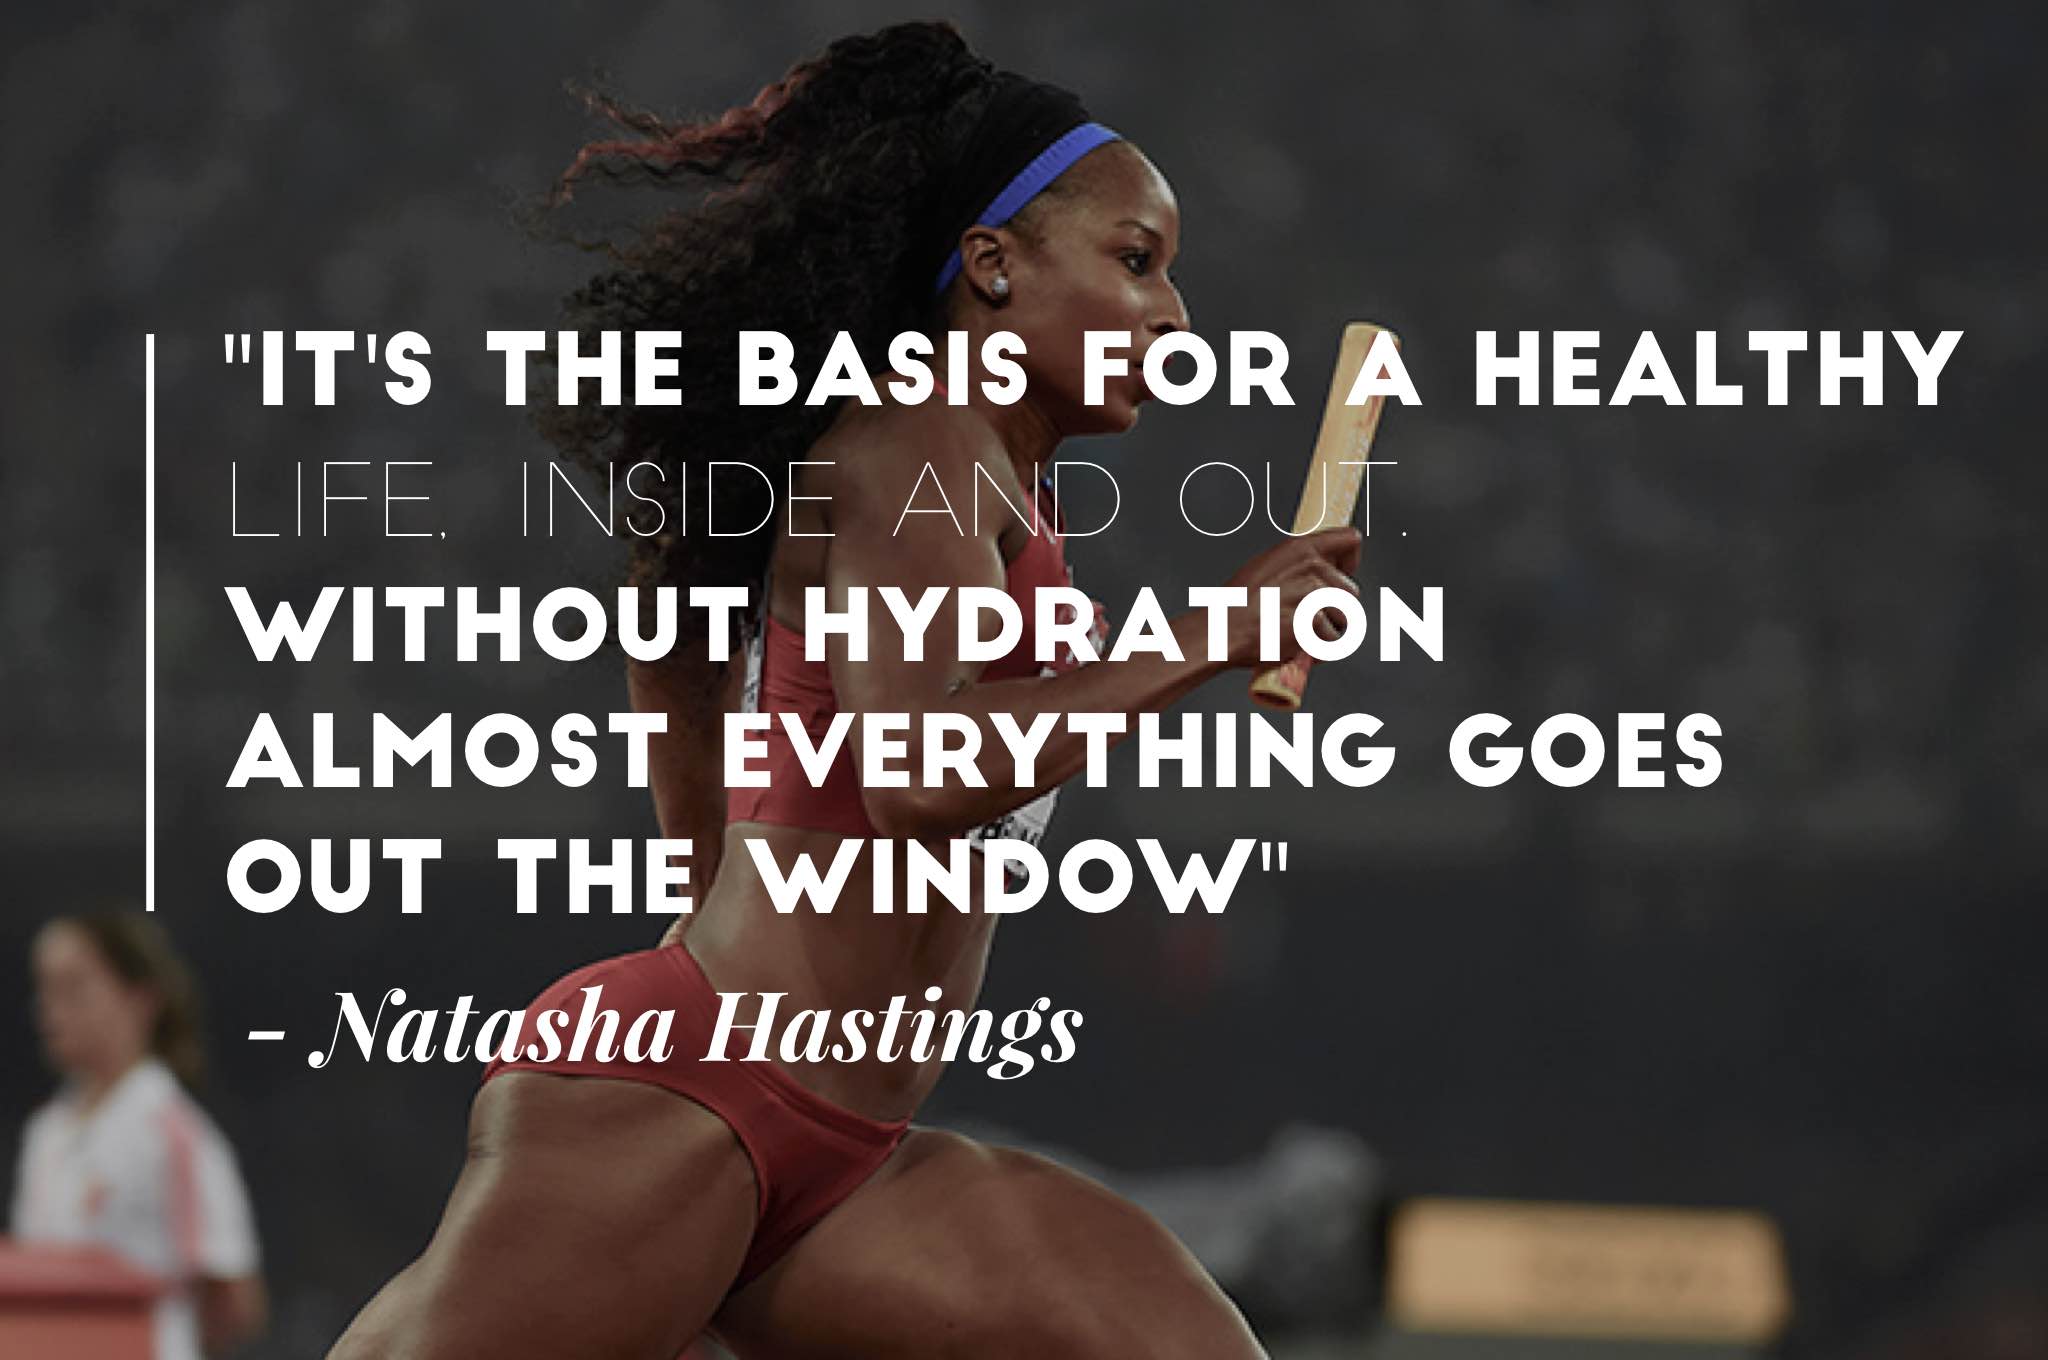 Here’s Why Water Should Be Every Athlete’s #1 Wellness Product